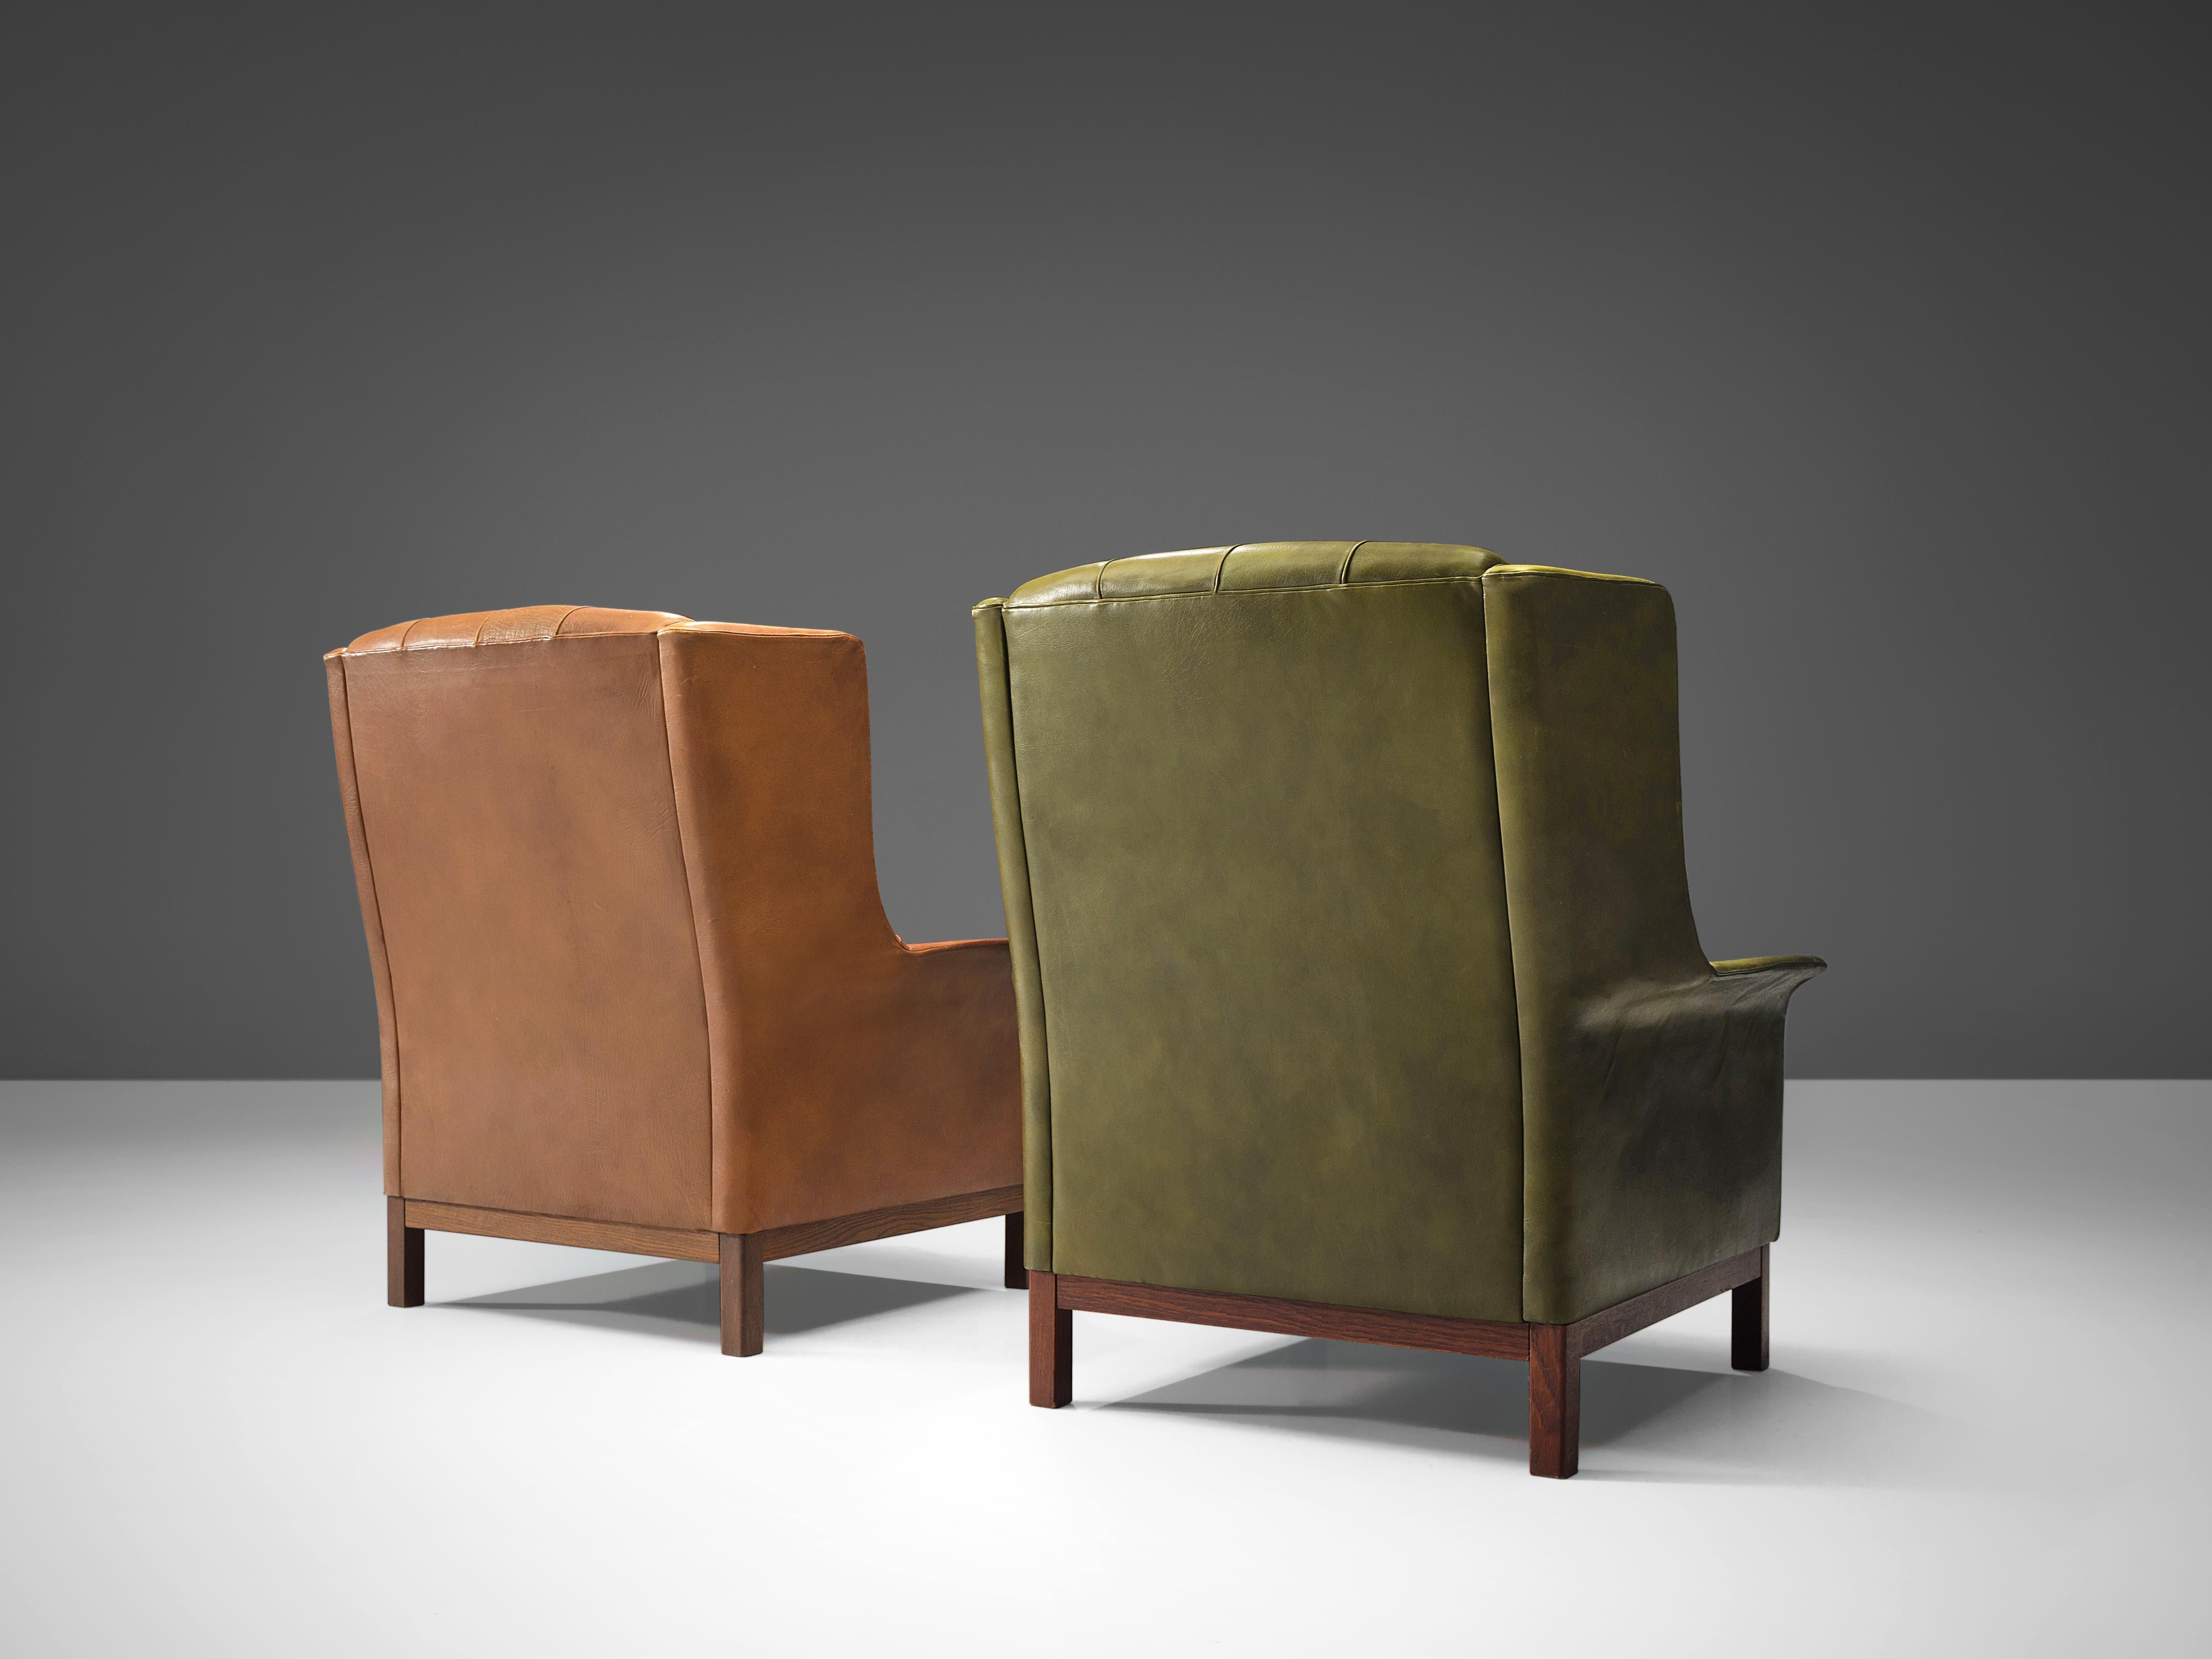 Mid-20th Century Pair of Arne Norell Lounge Chairs in Patinated Green and Cognac Leather